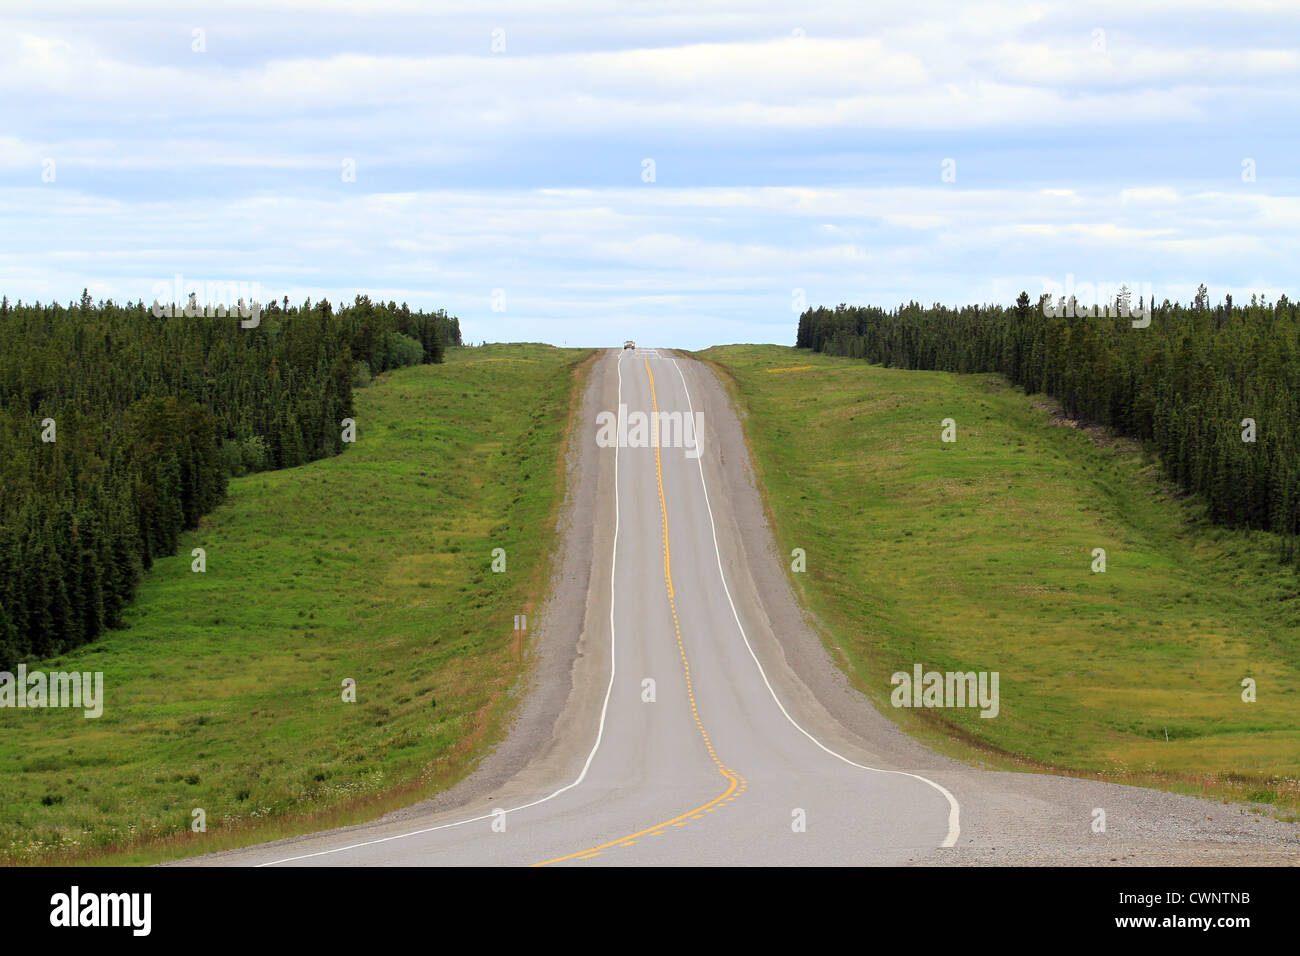 The Alaskan Highway as it goes through a Canadian forest with green grass and thick forestation. Stock Photo